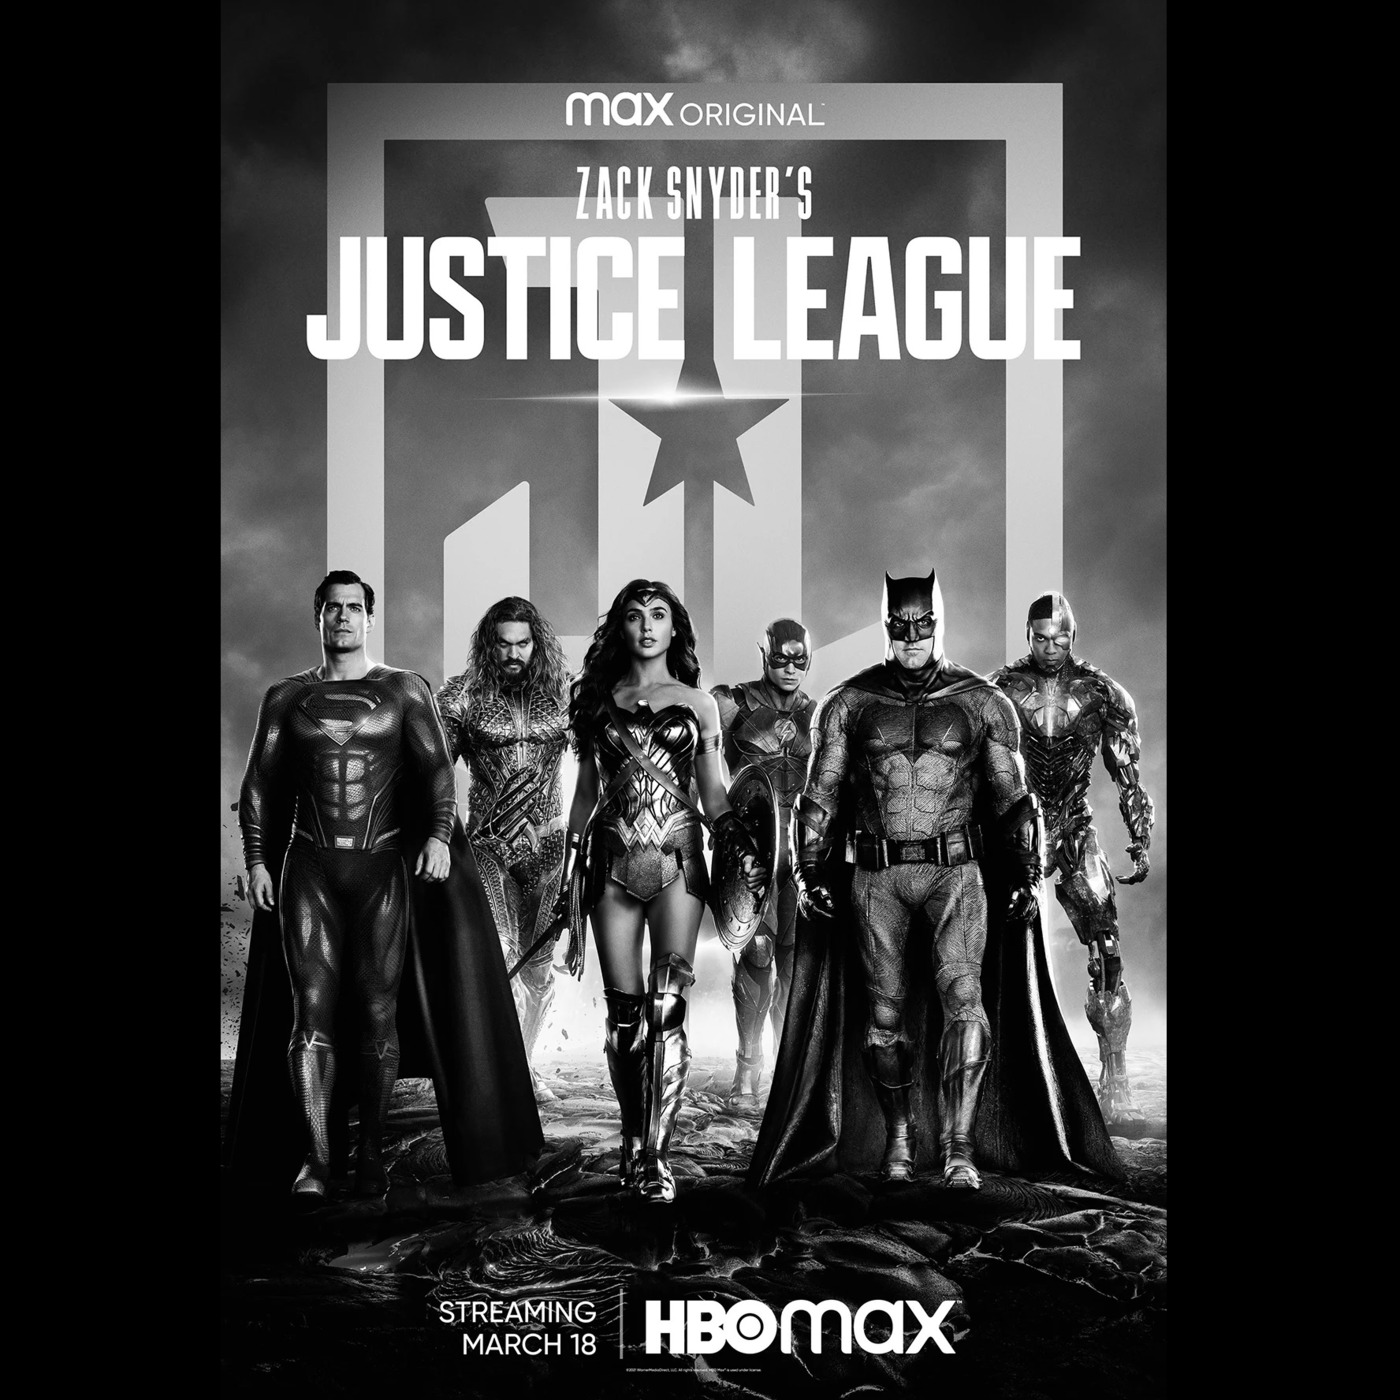 Zack Snyder’s Justice League - Themes and Character Analysis